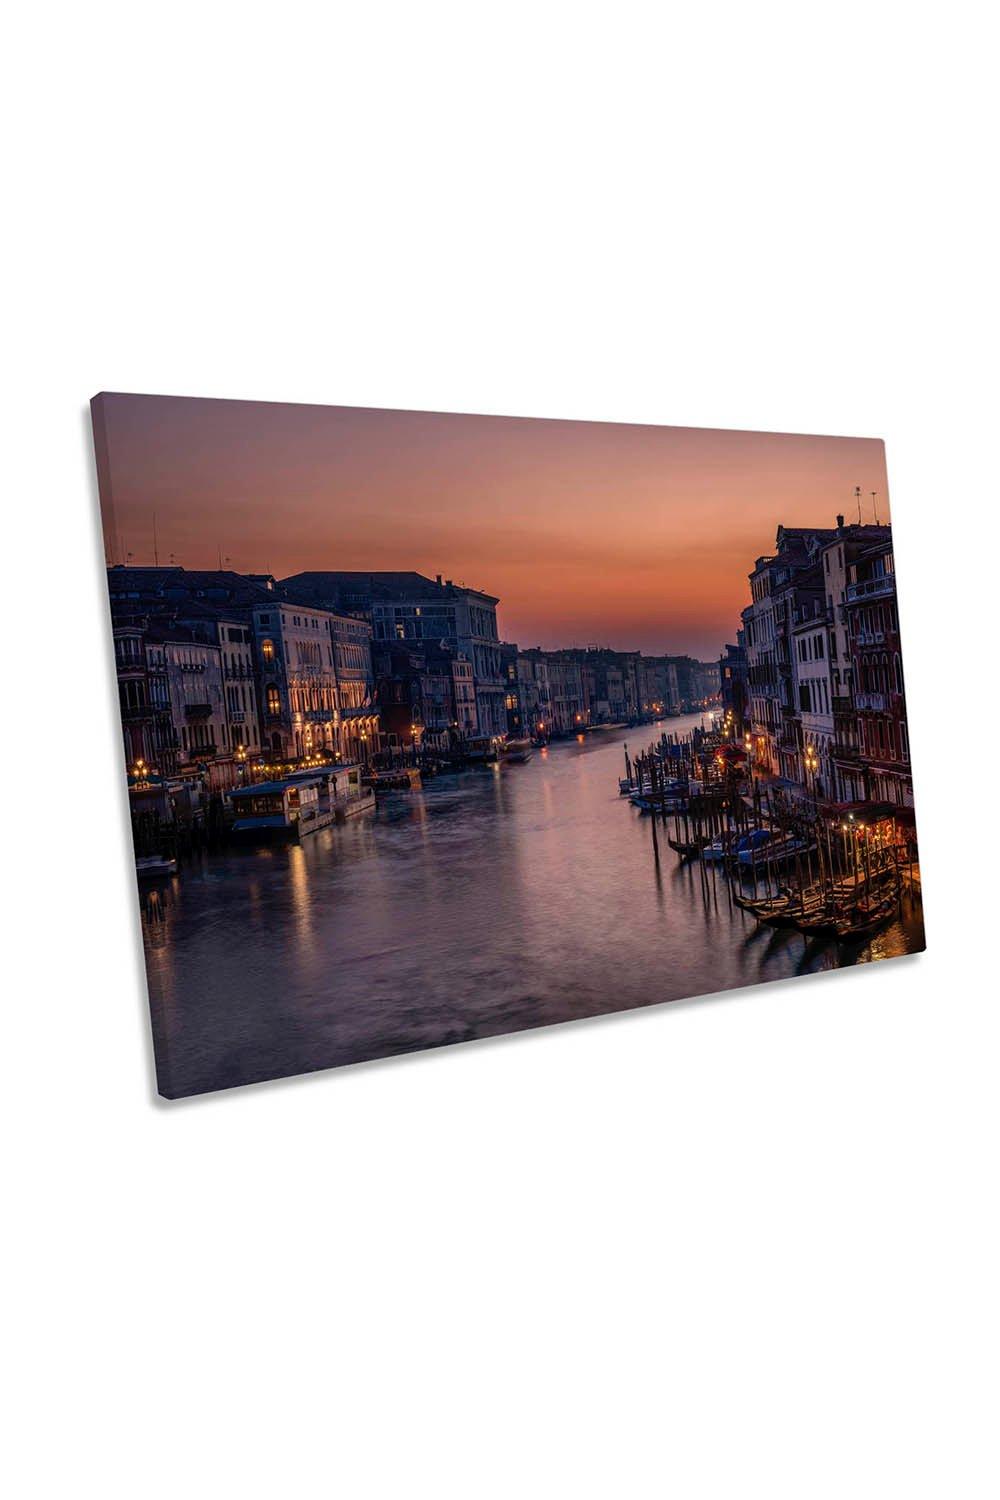 Venice Grand Canal at Sunset Canvas Wall Art Picture Print